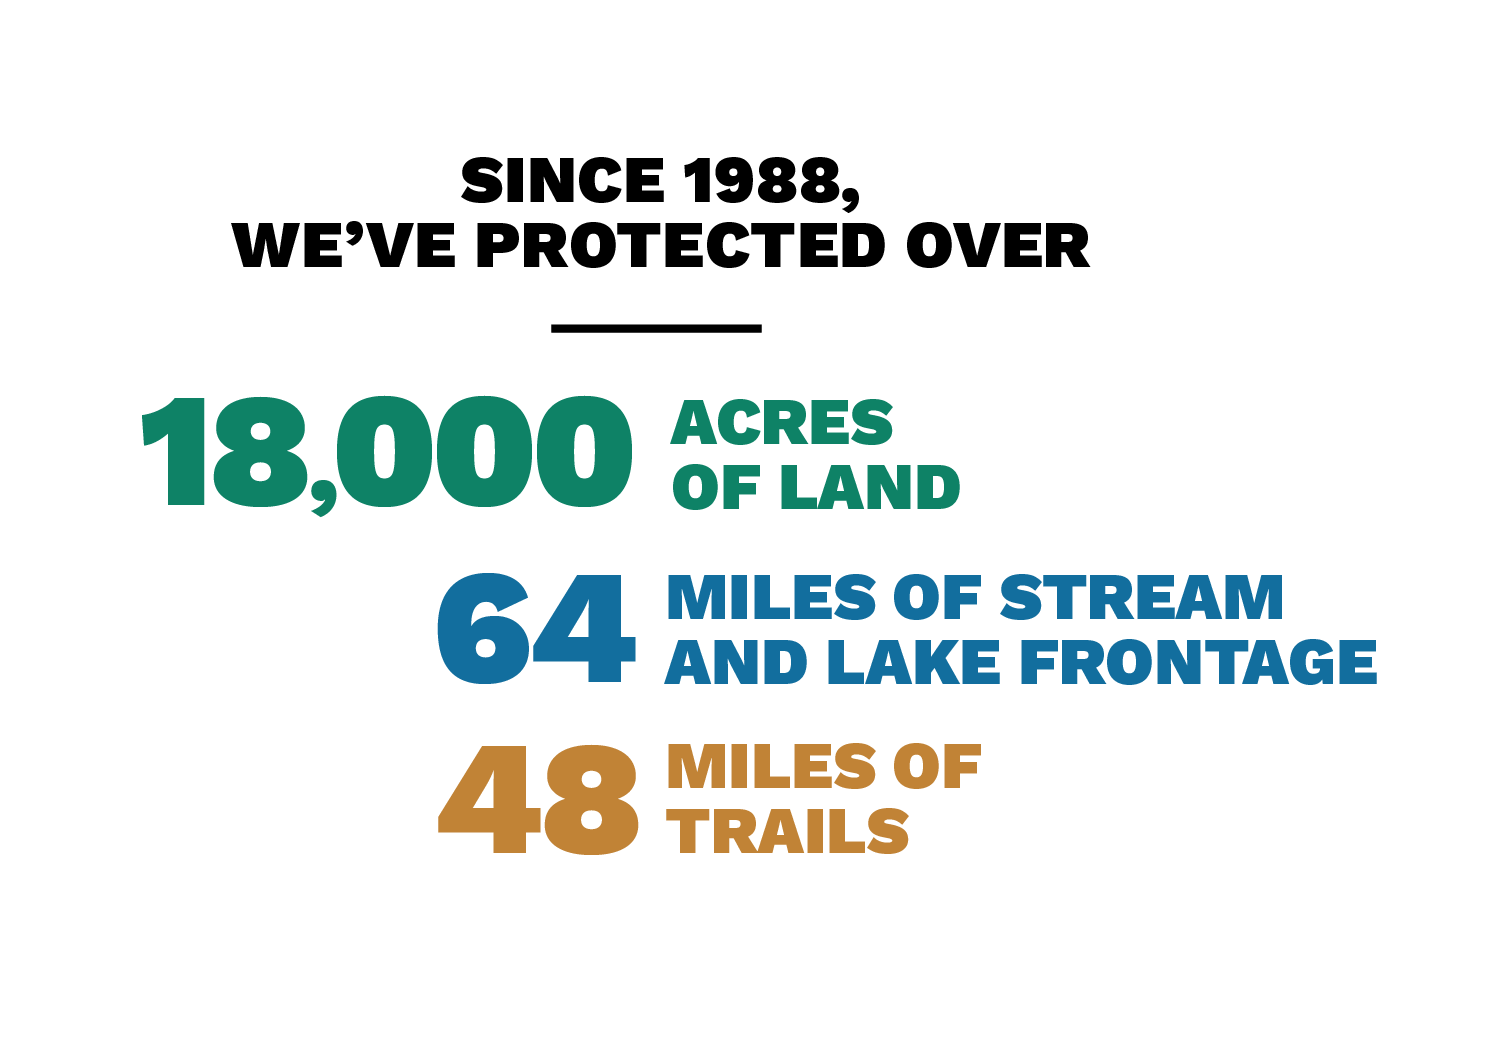 Since 1988, We've Protected Over 18000 Acres Of Land, 64 Miles Of Stream and Lake Frontage and 48 miles of trails